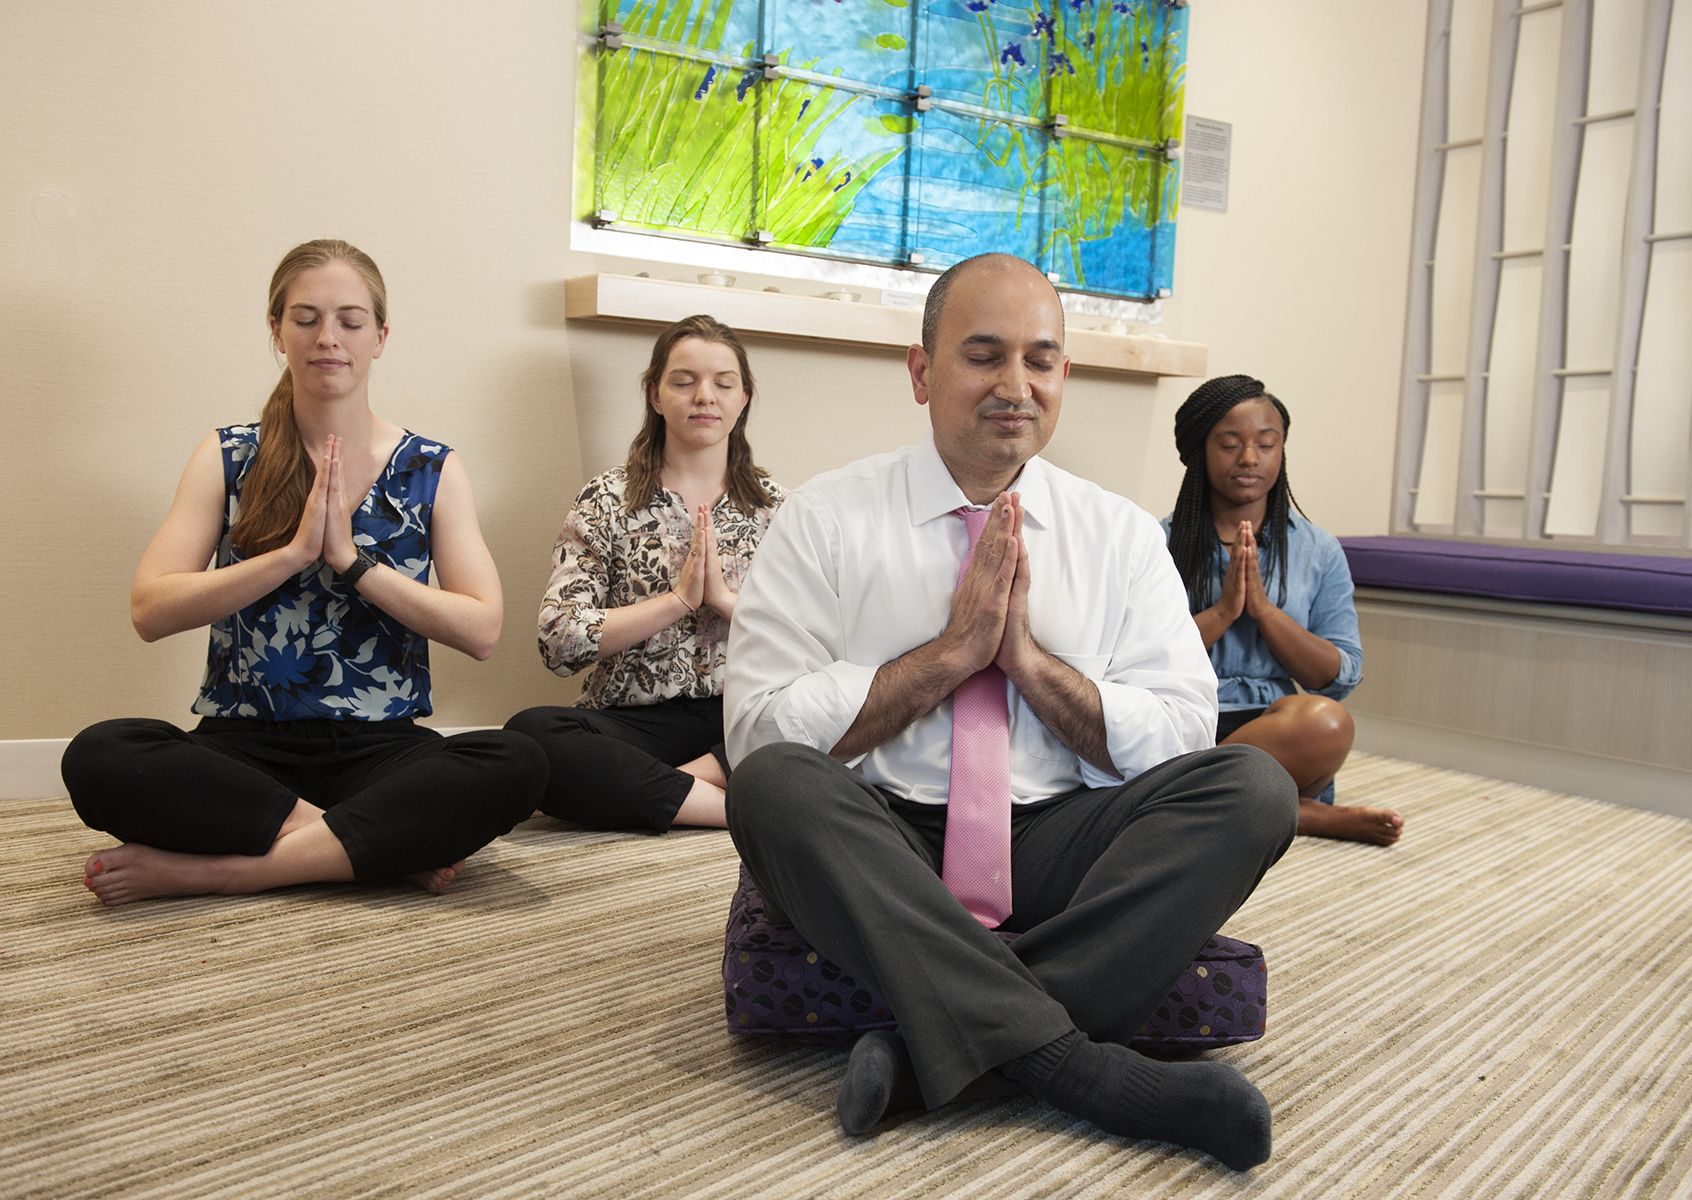 Kaushal Nanavati, MD, leads meditation in the meditation room at the Upstate Cancer Center. In the back, from left, are medical students Megan Taggart and Alison Stedman and intern Amani Mike. (photo by Susan Kahn)